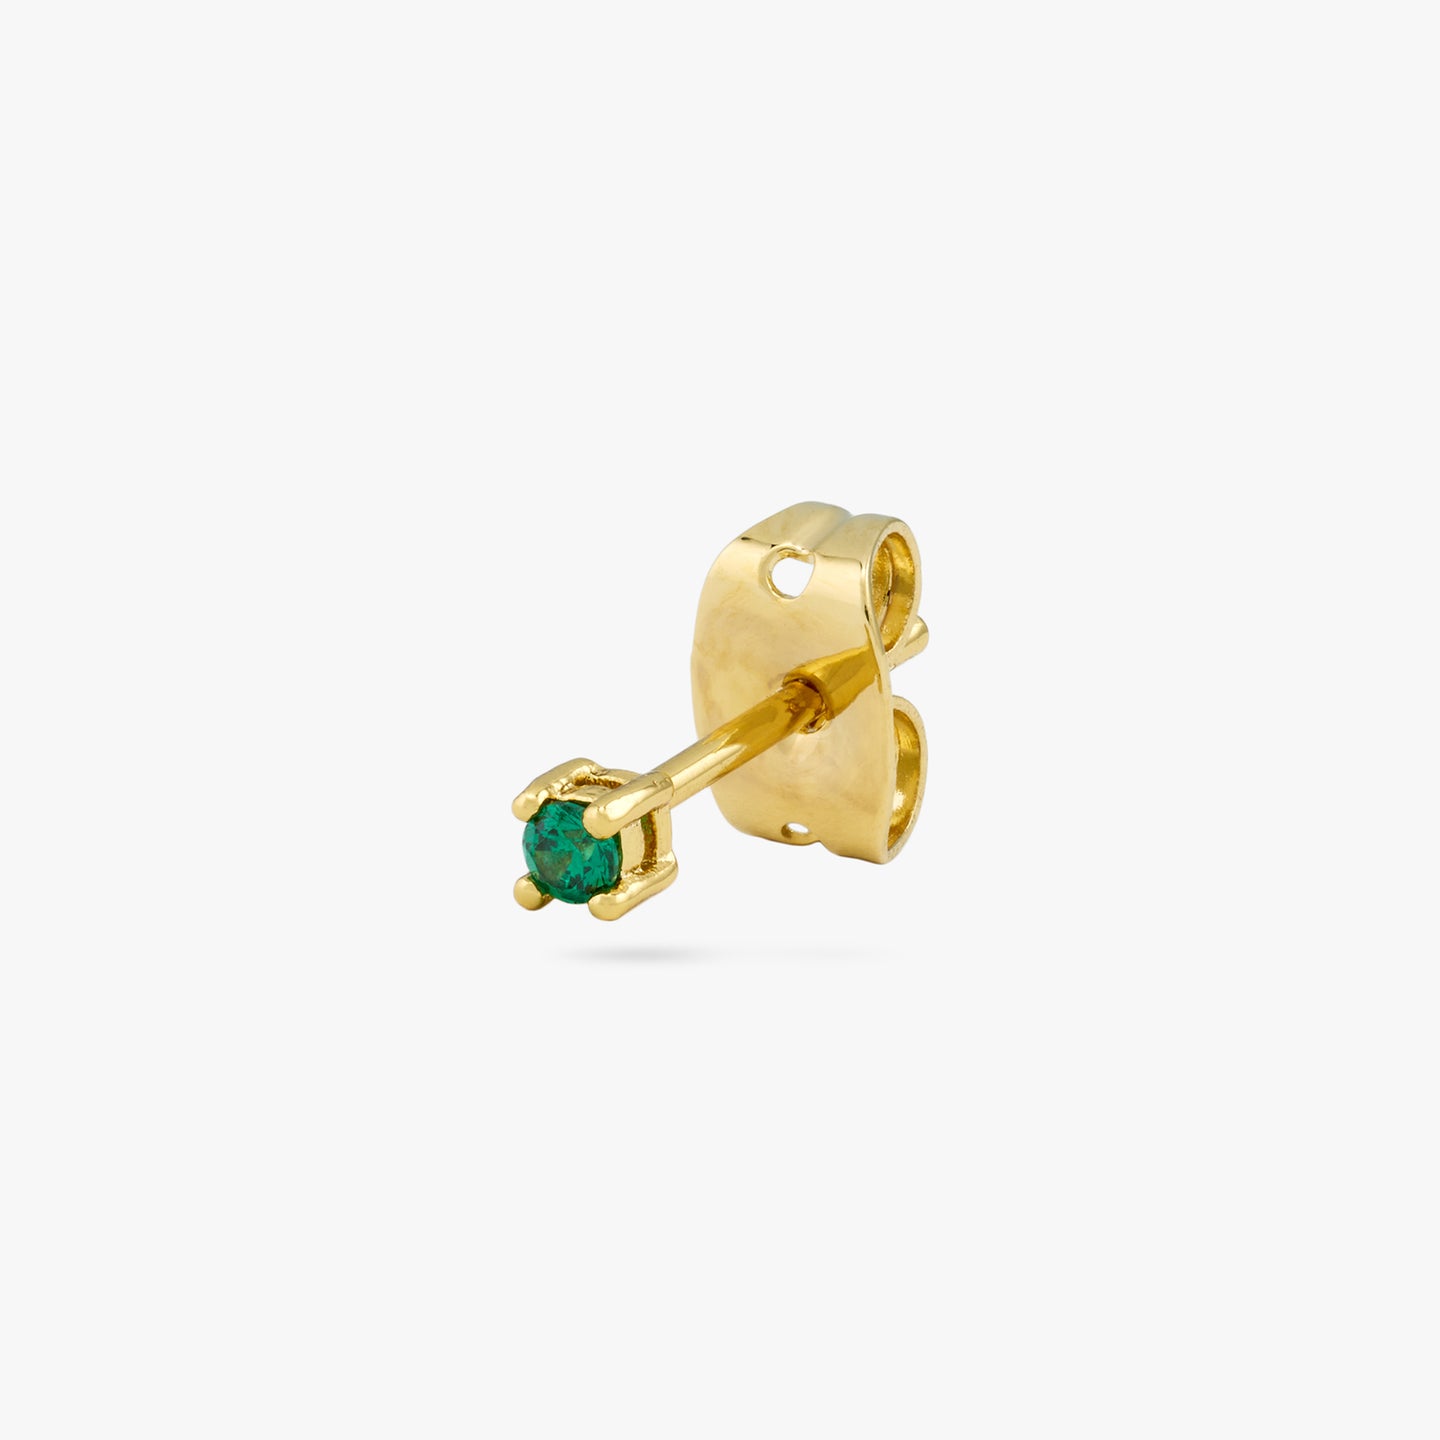 A mini gold stud with a green cz gem color:null|gold/green